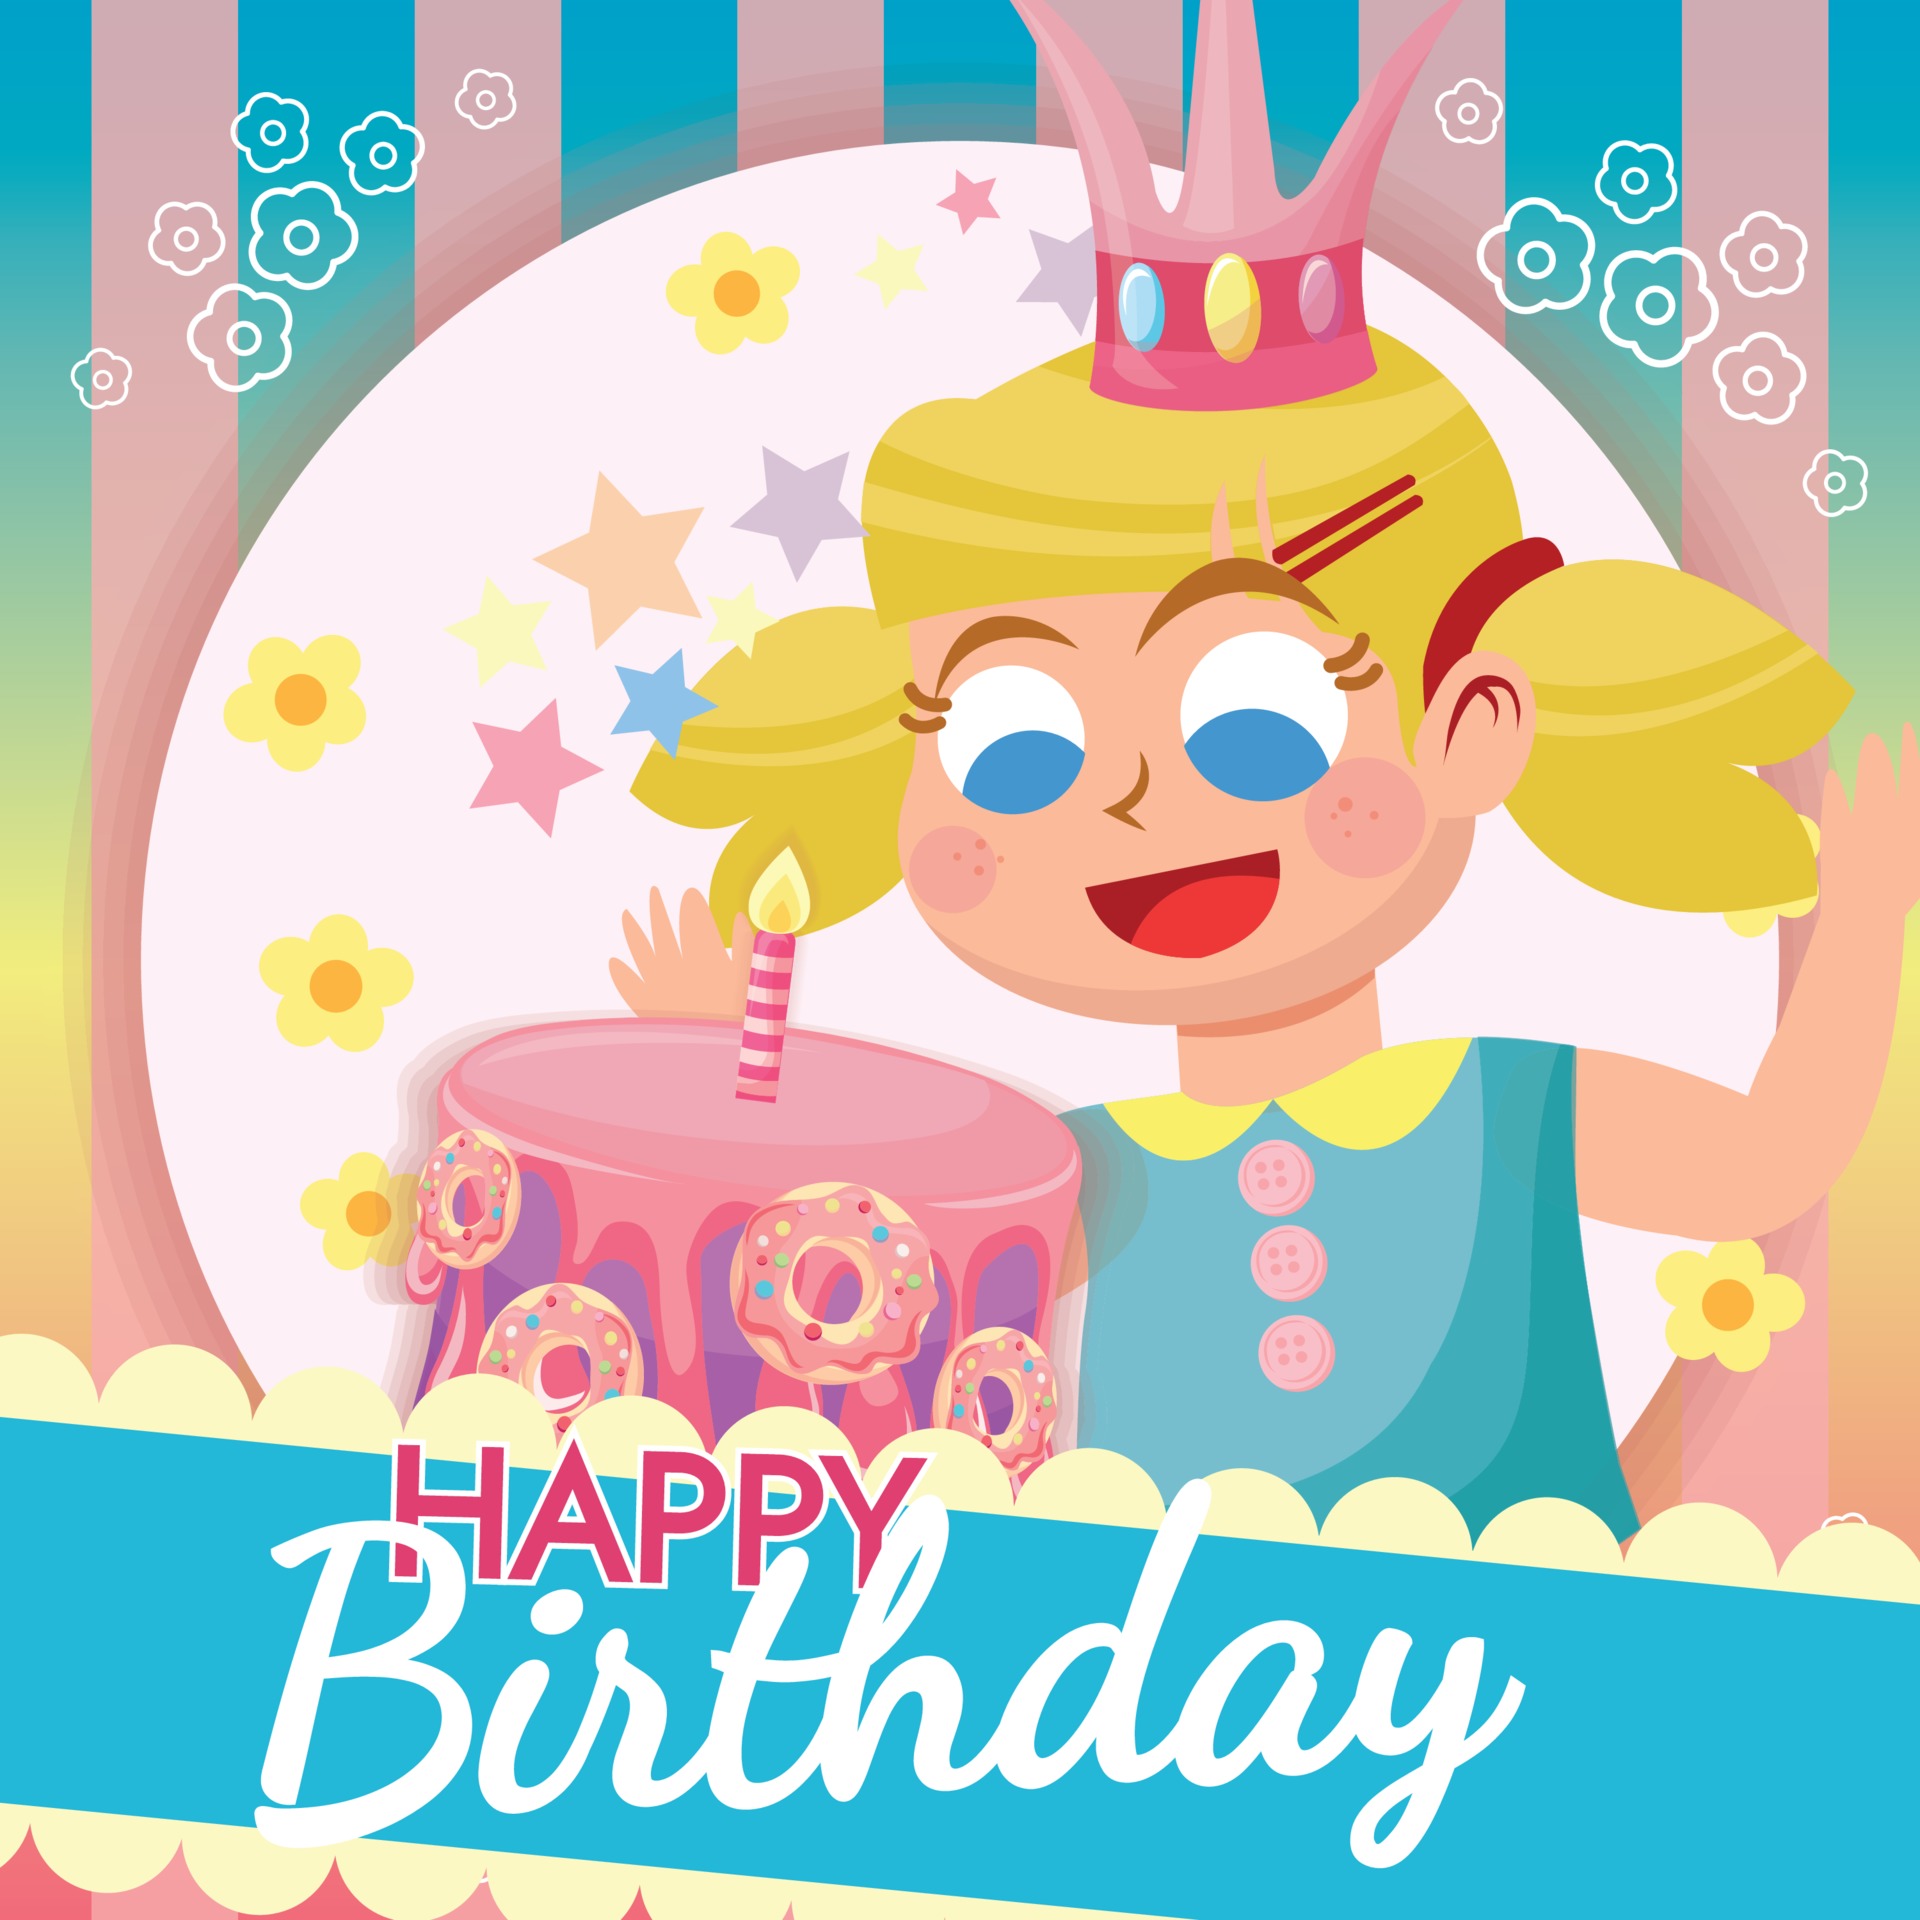 colourful birthday background illustration design for card 2377833 ...